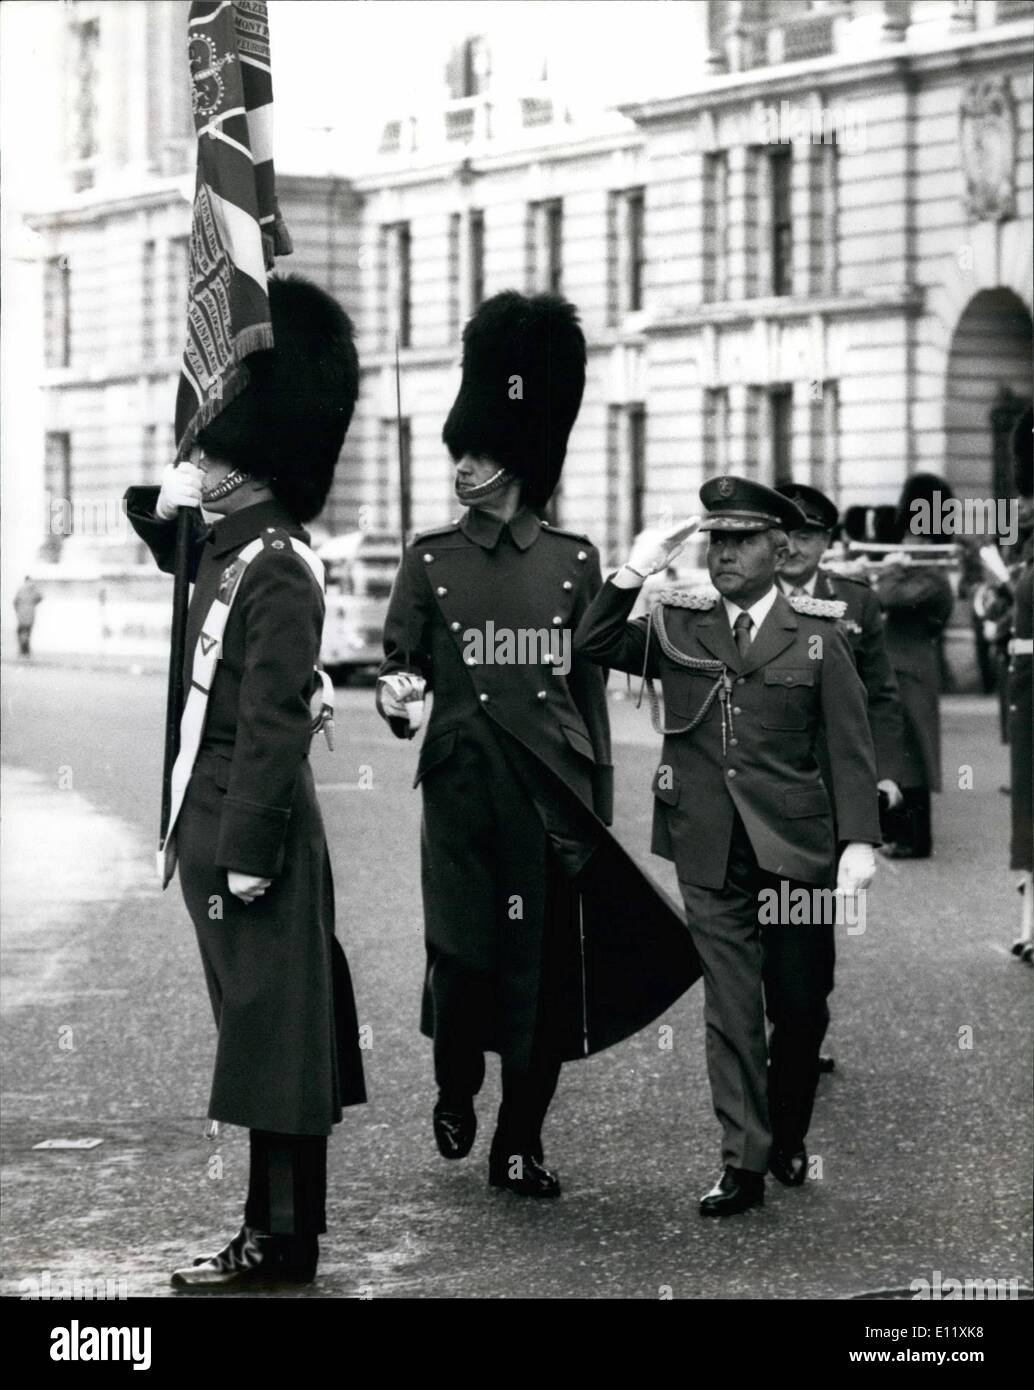 Nov. 11, 1980 - Japanese Chief Of Staff Visits Ministry Of Defence: General Toshimichi Suzuki, Chief of Staff, Japanese Gound Self Defence Force, arrived in London today for a weeks visit, in which he will be visiting the British Army. Photo shows General Toshimichi Suzuki saluting the colours of the 1st Battalion Irish Guards during his inspection of the guard of honour on his arrival at the Ministry of Defence in Whitehall today. Stock Photo